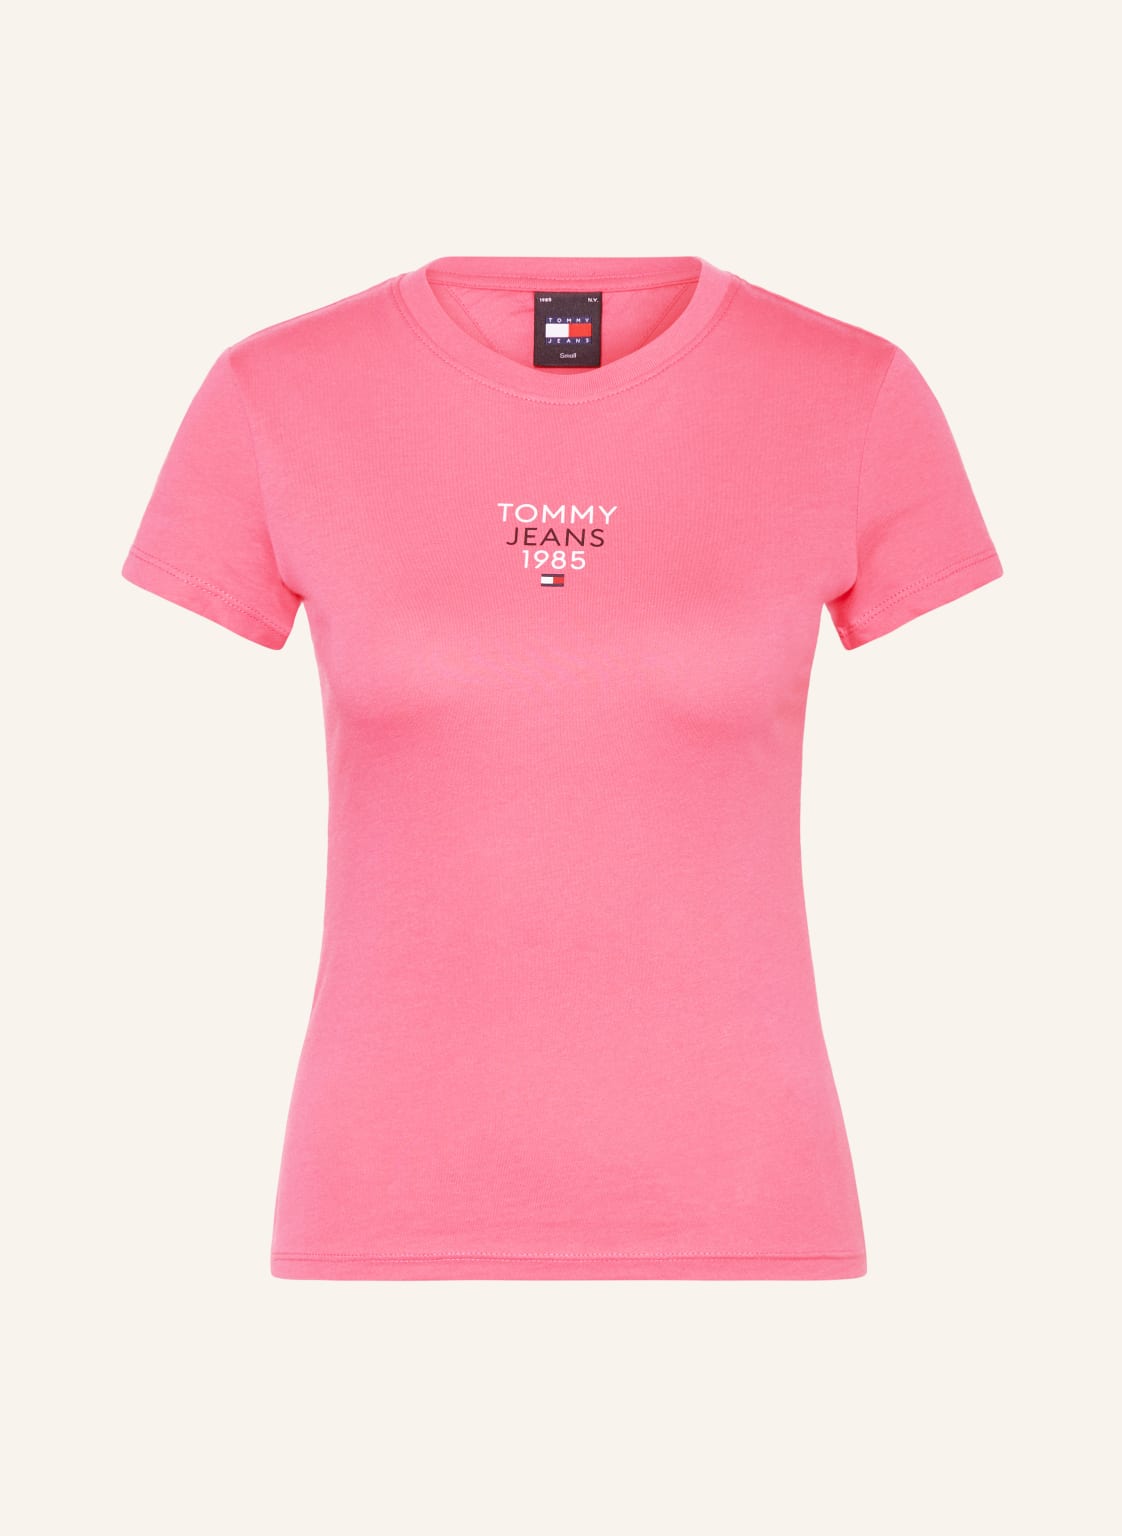 Tommy Jeans T-Shirt pink von Tommy Jeans